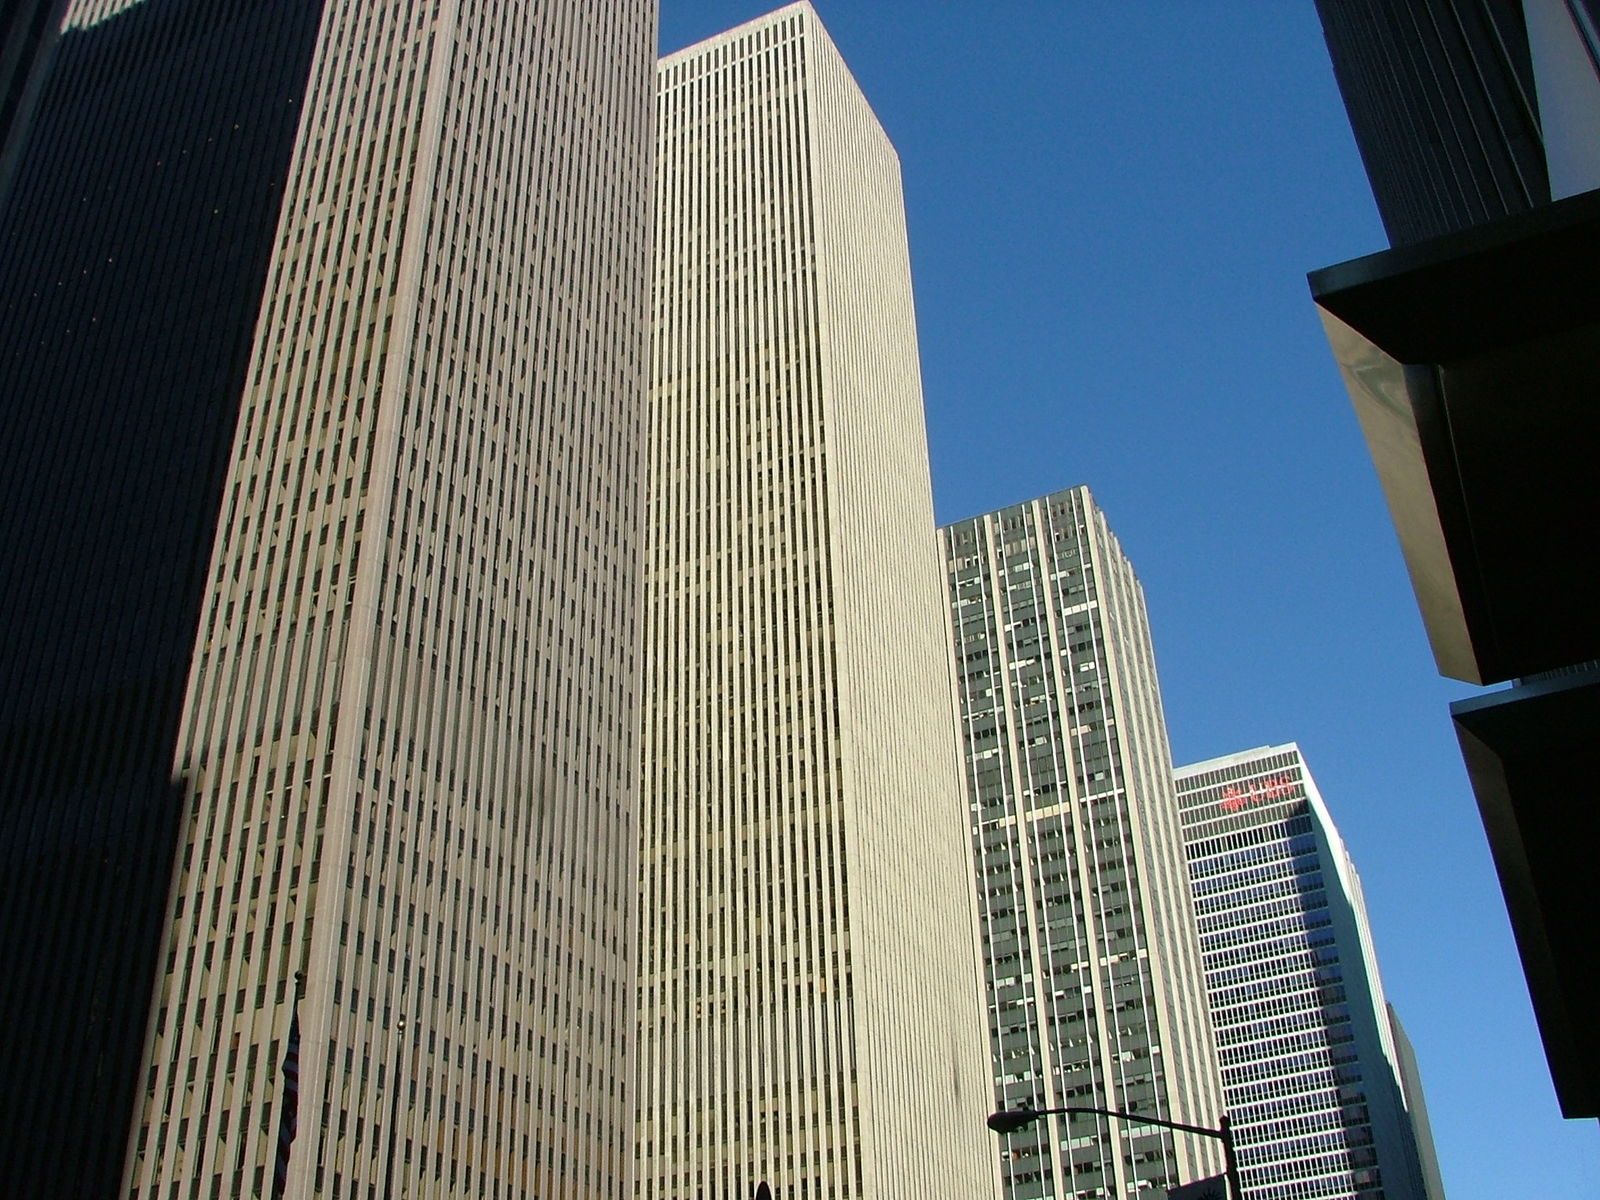 two very tall buildings next to each other in a big city